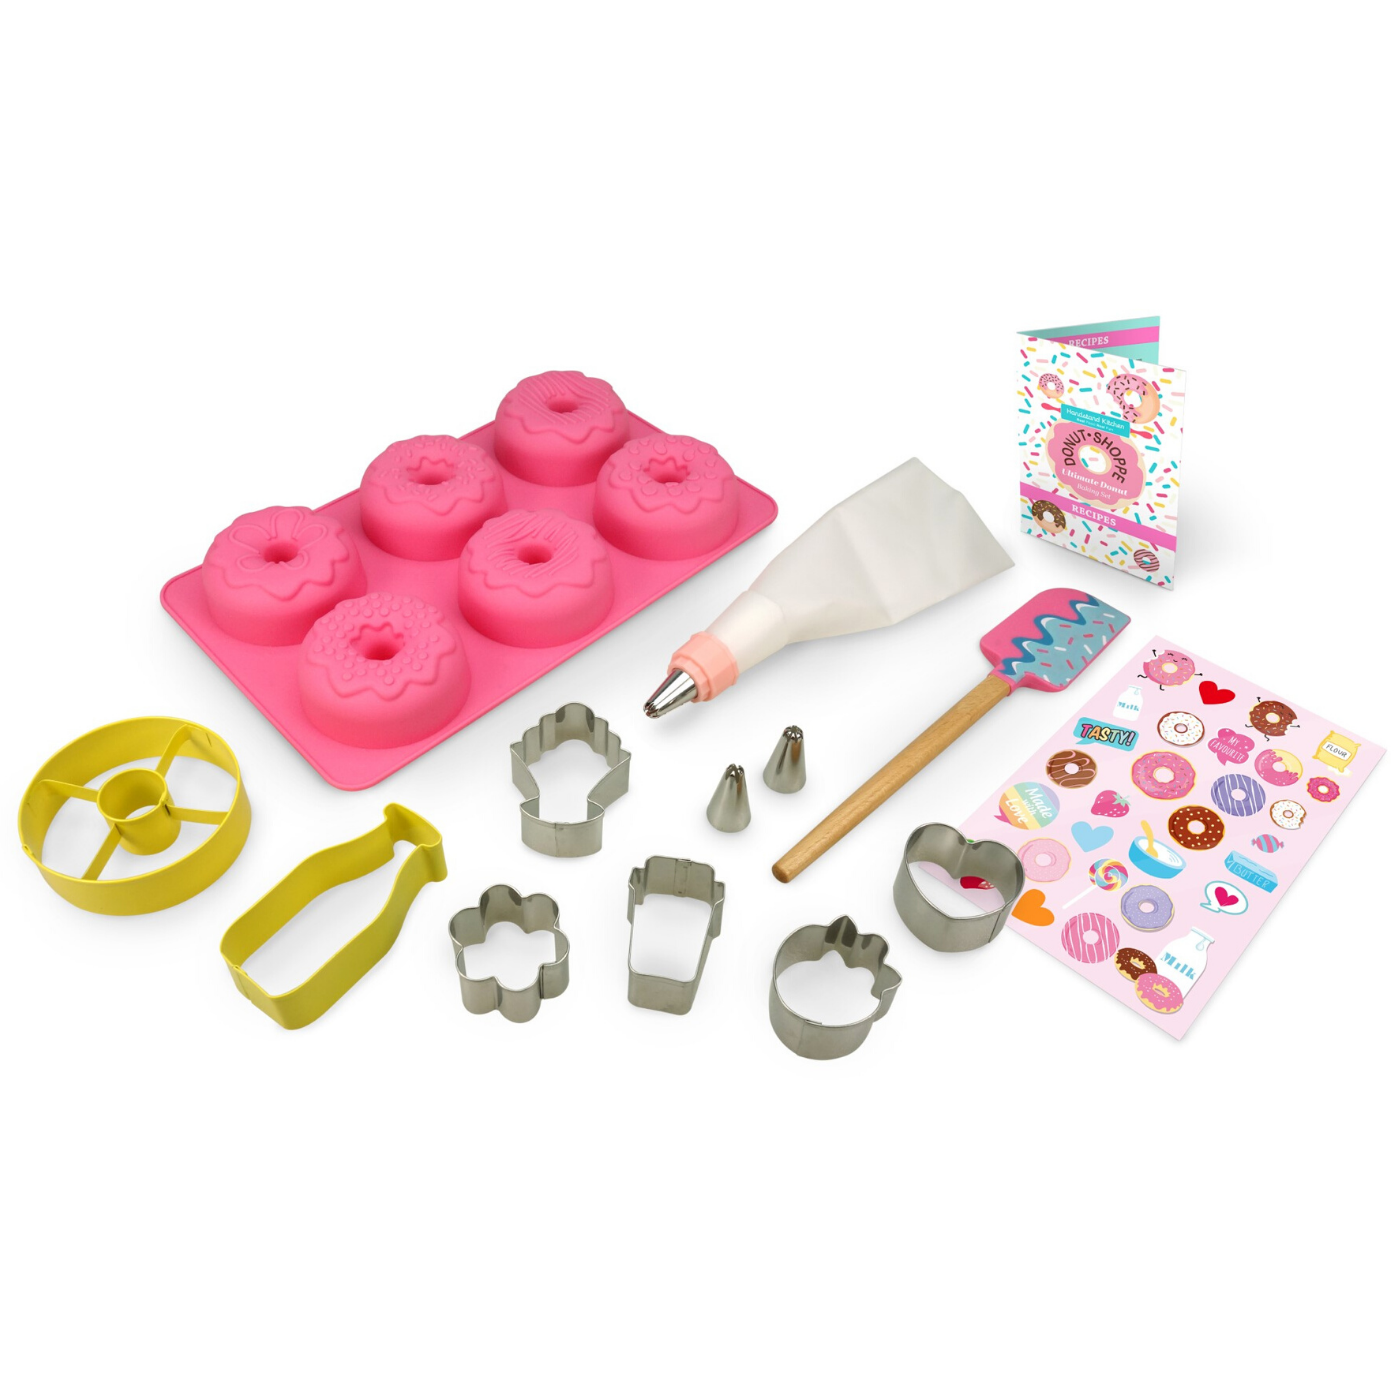 Tasty Kits Donut Gadget Set with Bowl, Baking Cups, Spatula, Decorating  Tips, Piping Bags, Whisk, Multi-color, 15 Piece 